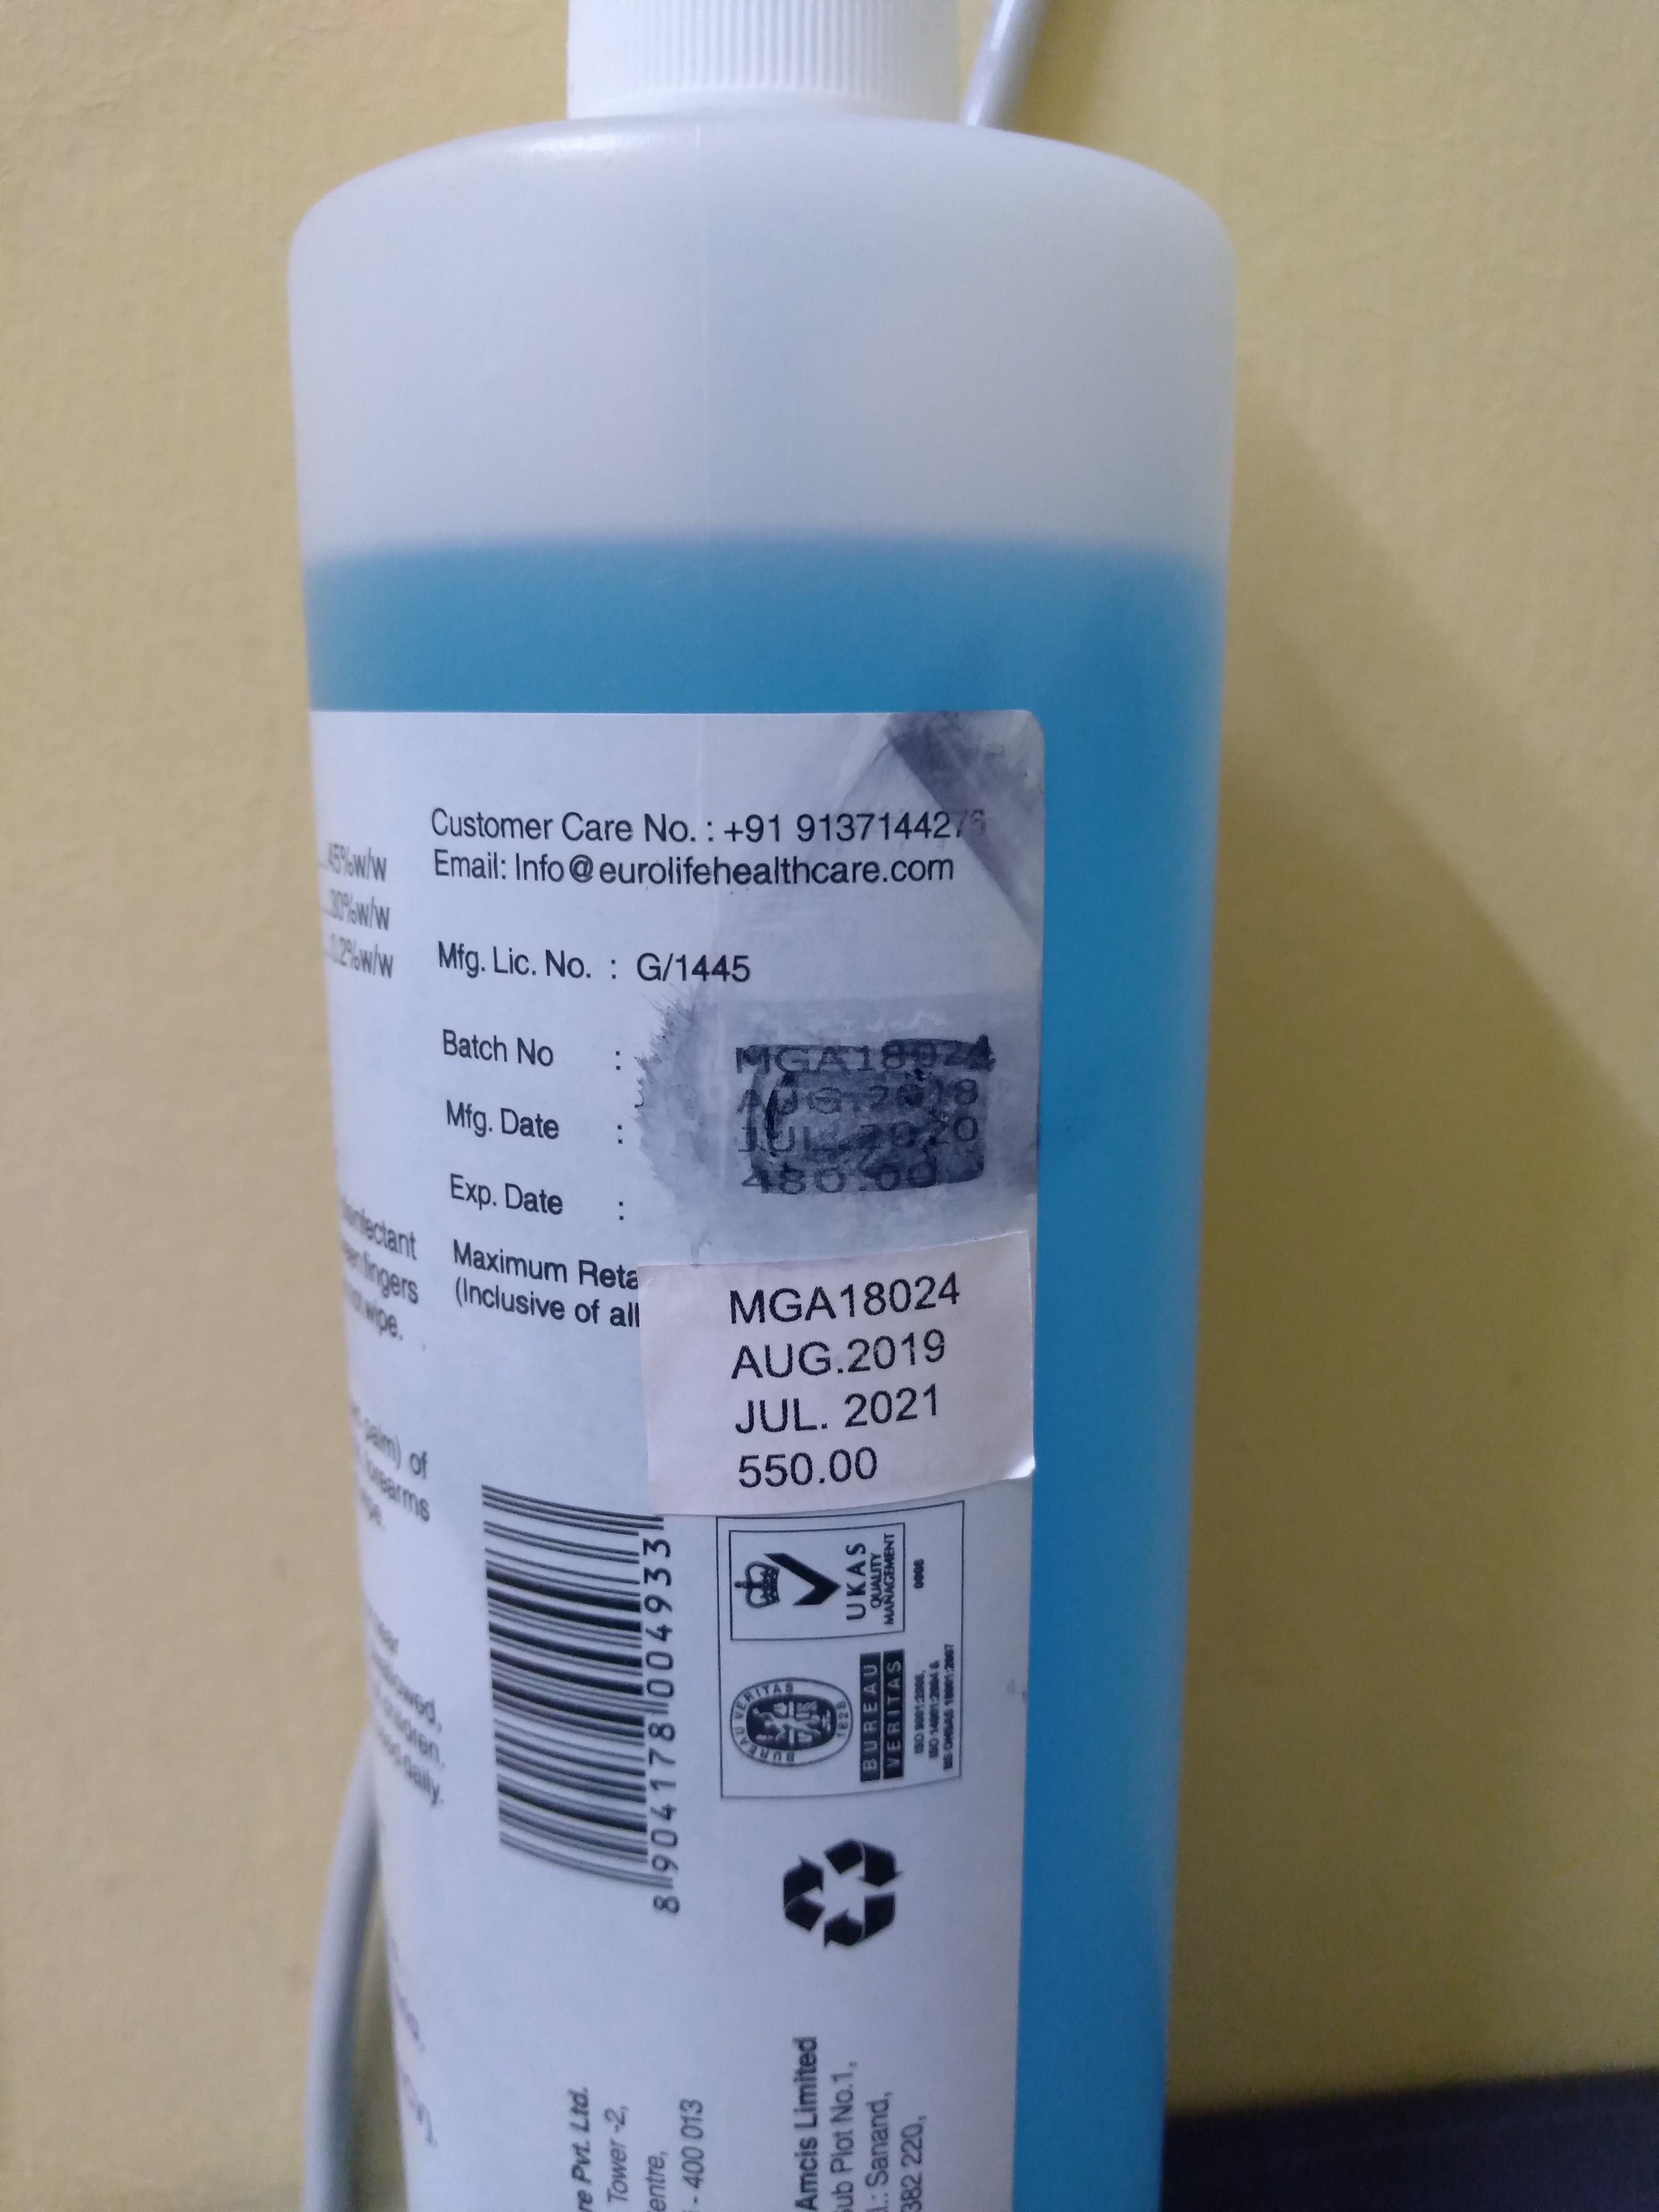 One such bottle with the tampered label. Photo: Reddit